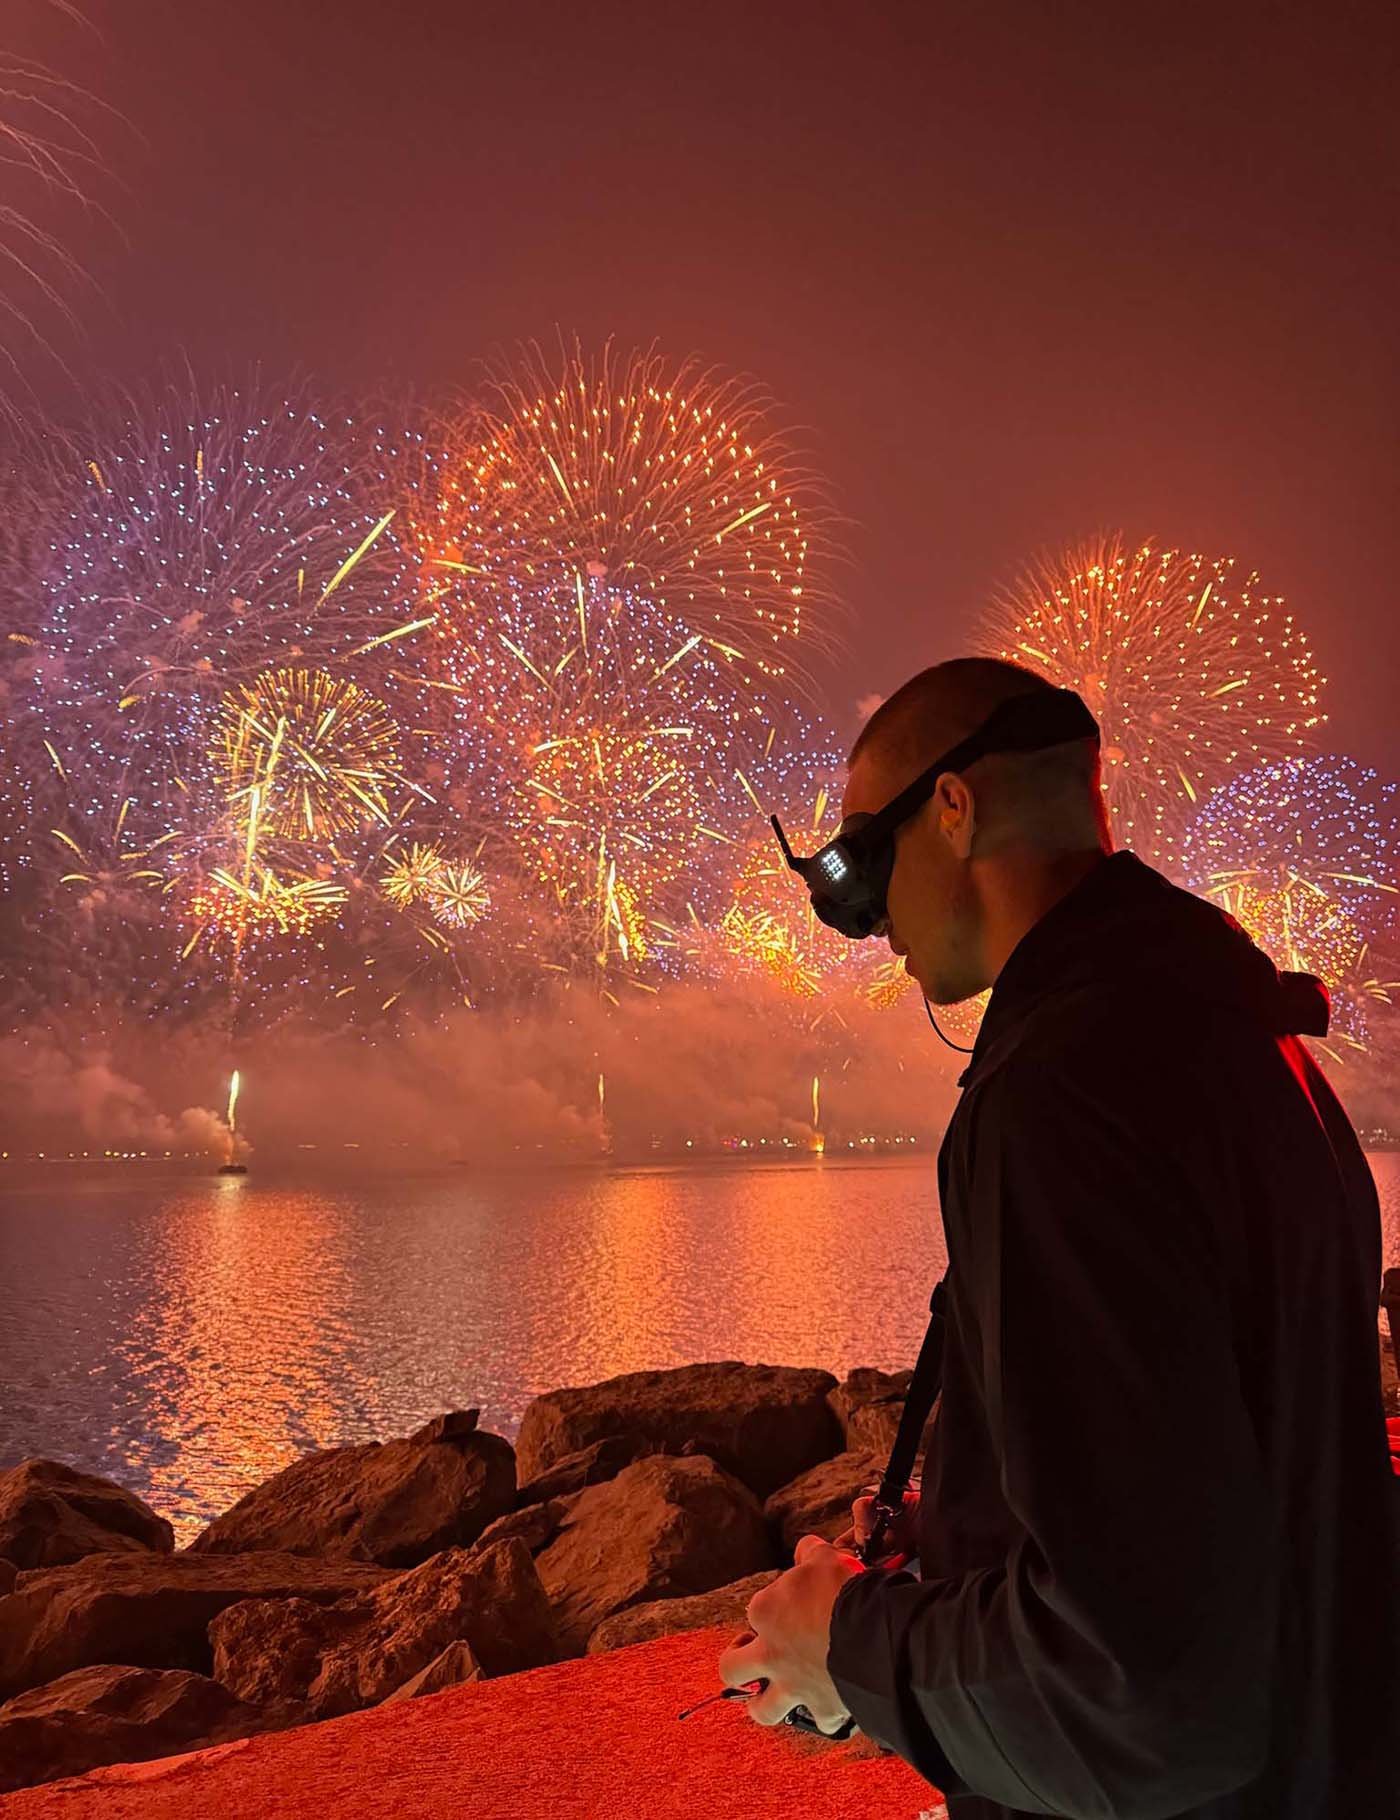  Drone operator controlling a drone amidst vibrant fireworks display. 